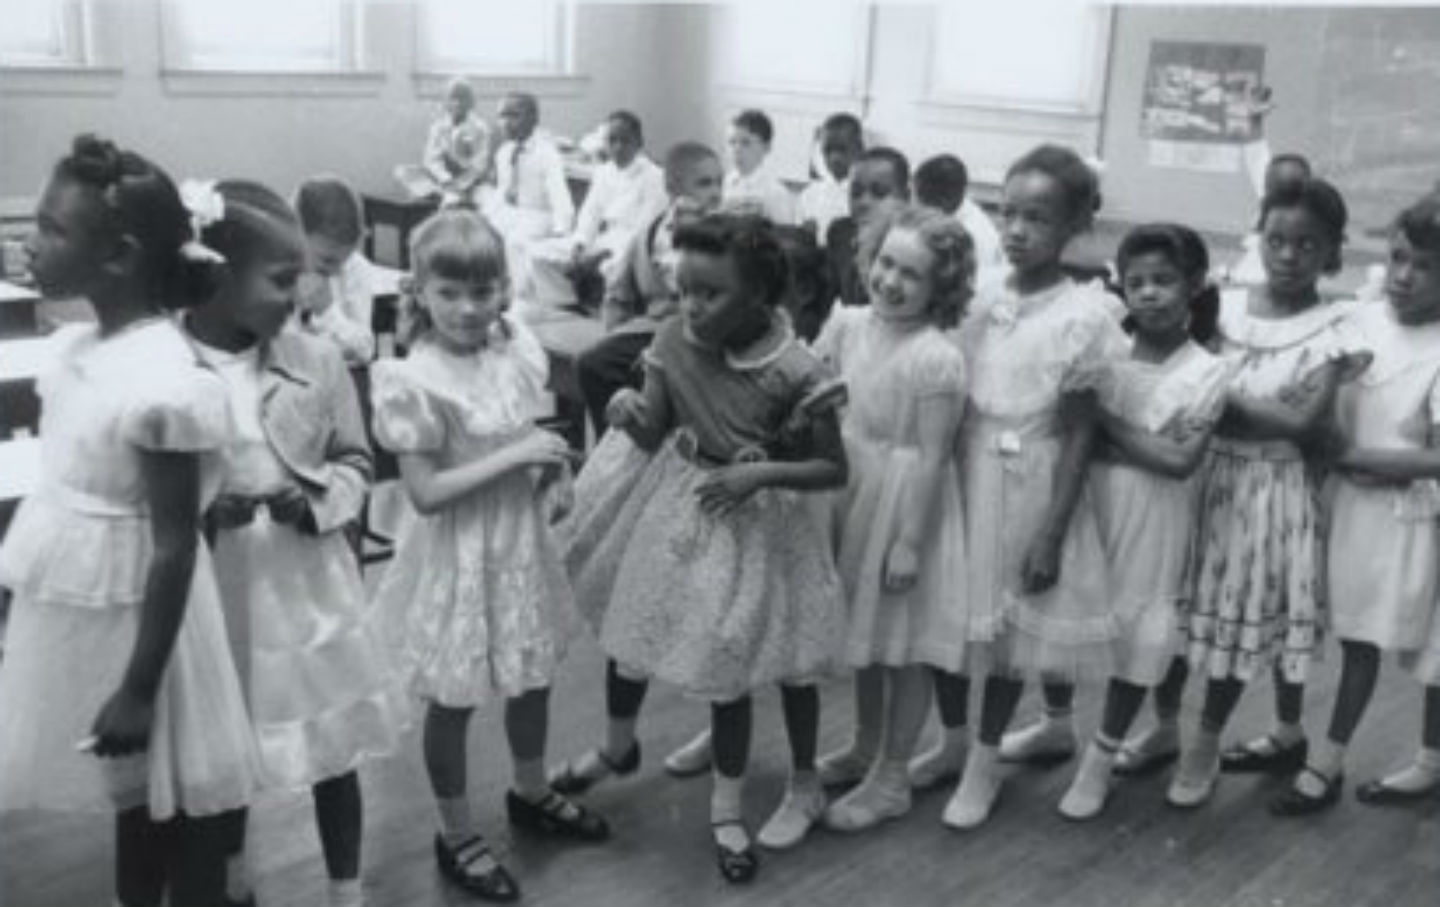 May 17, 1954: Supreme Court Rules Segregation Unconstitutional in ‘Brown v. Board of Ed.’